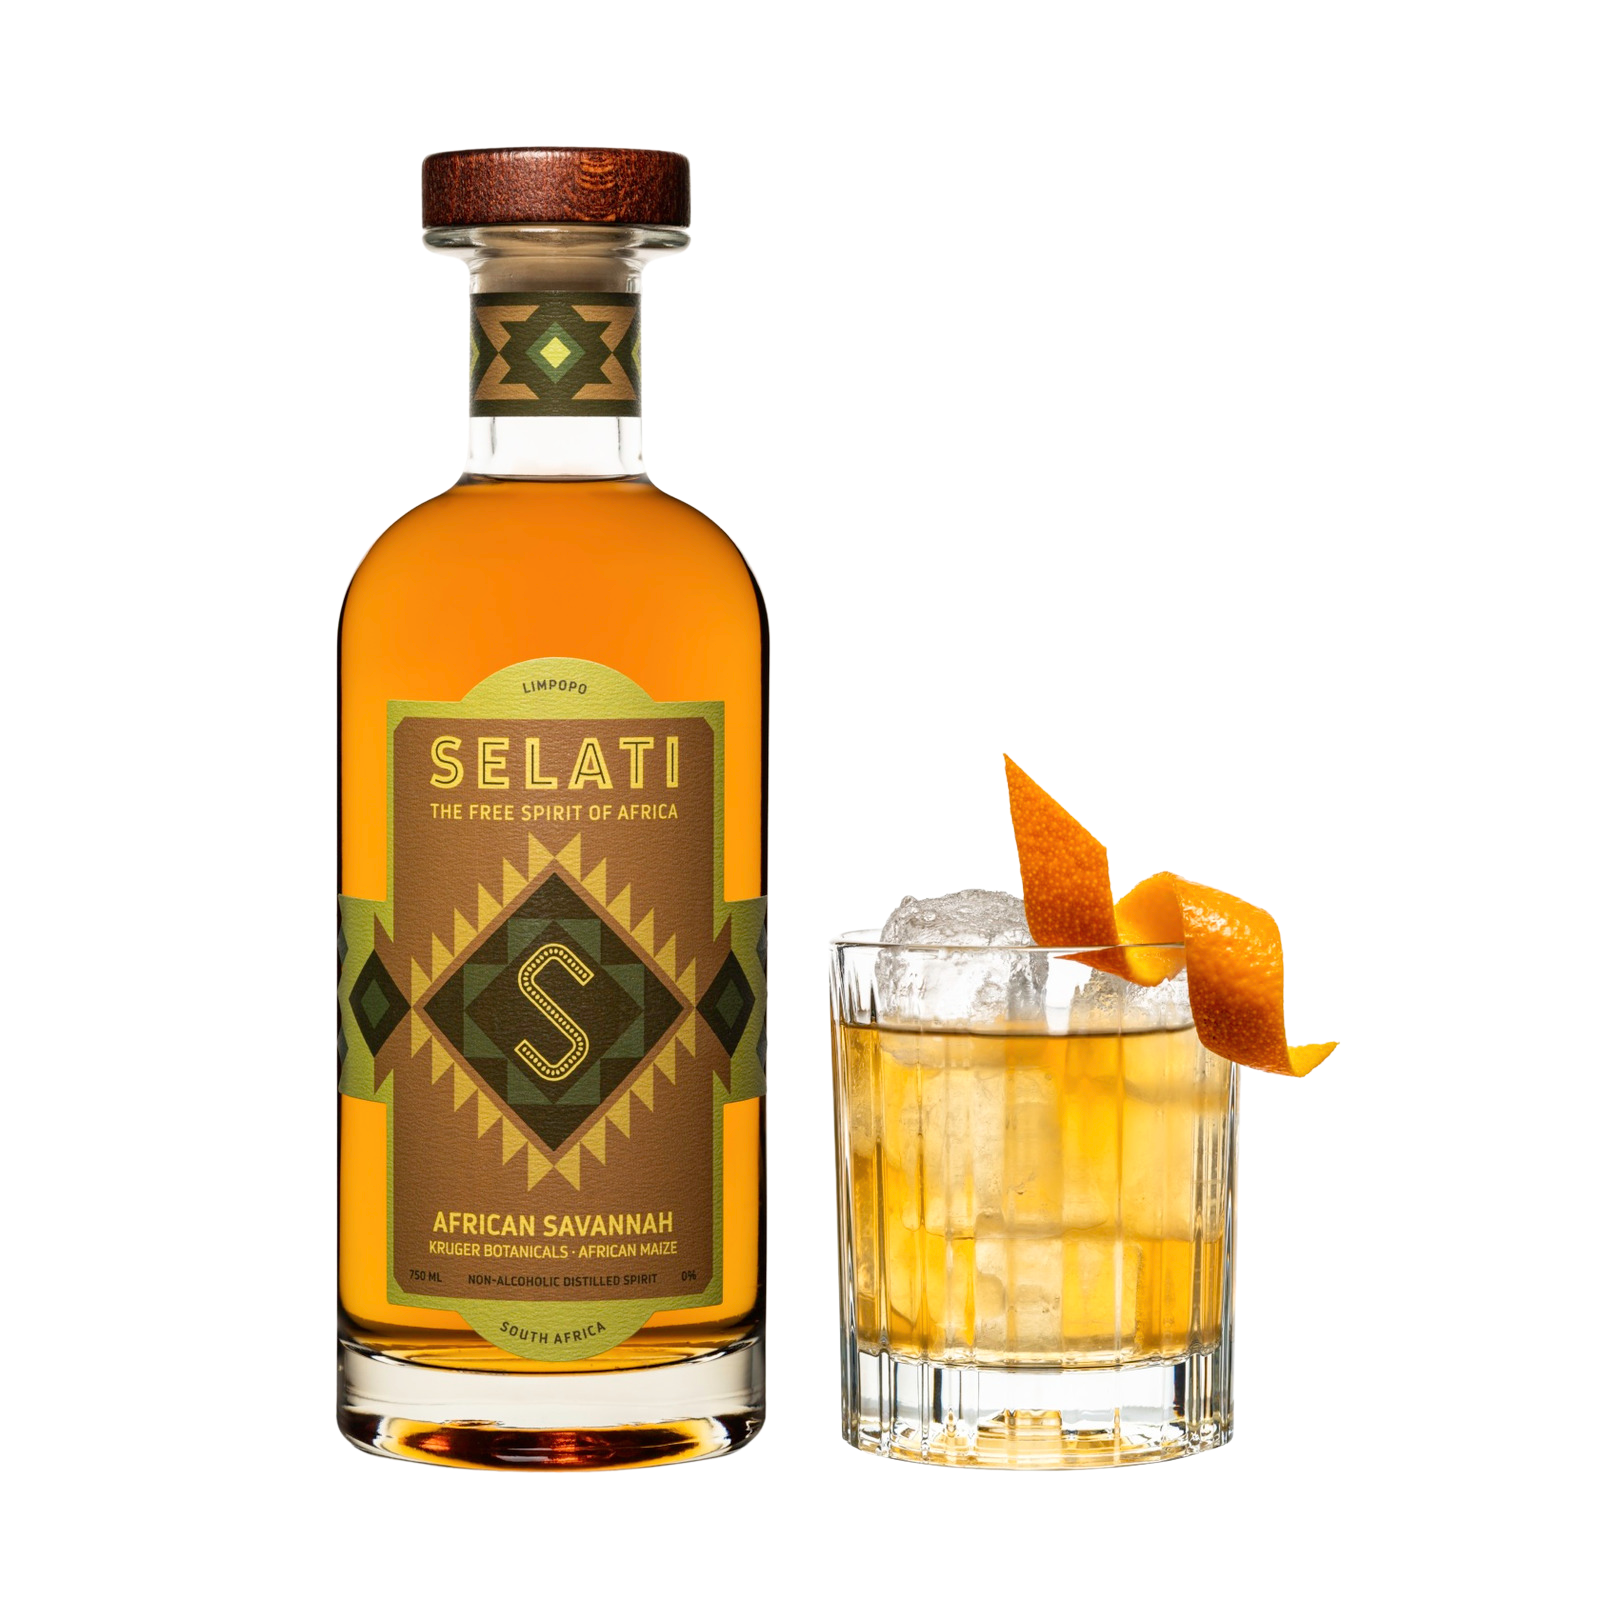 Bottle and glass with non-alcoholic drink African Savannah by Selati